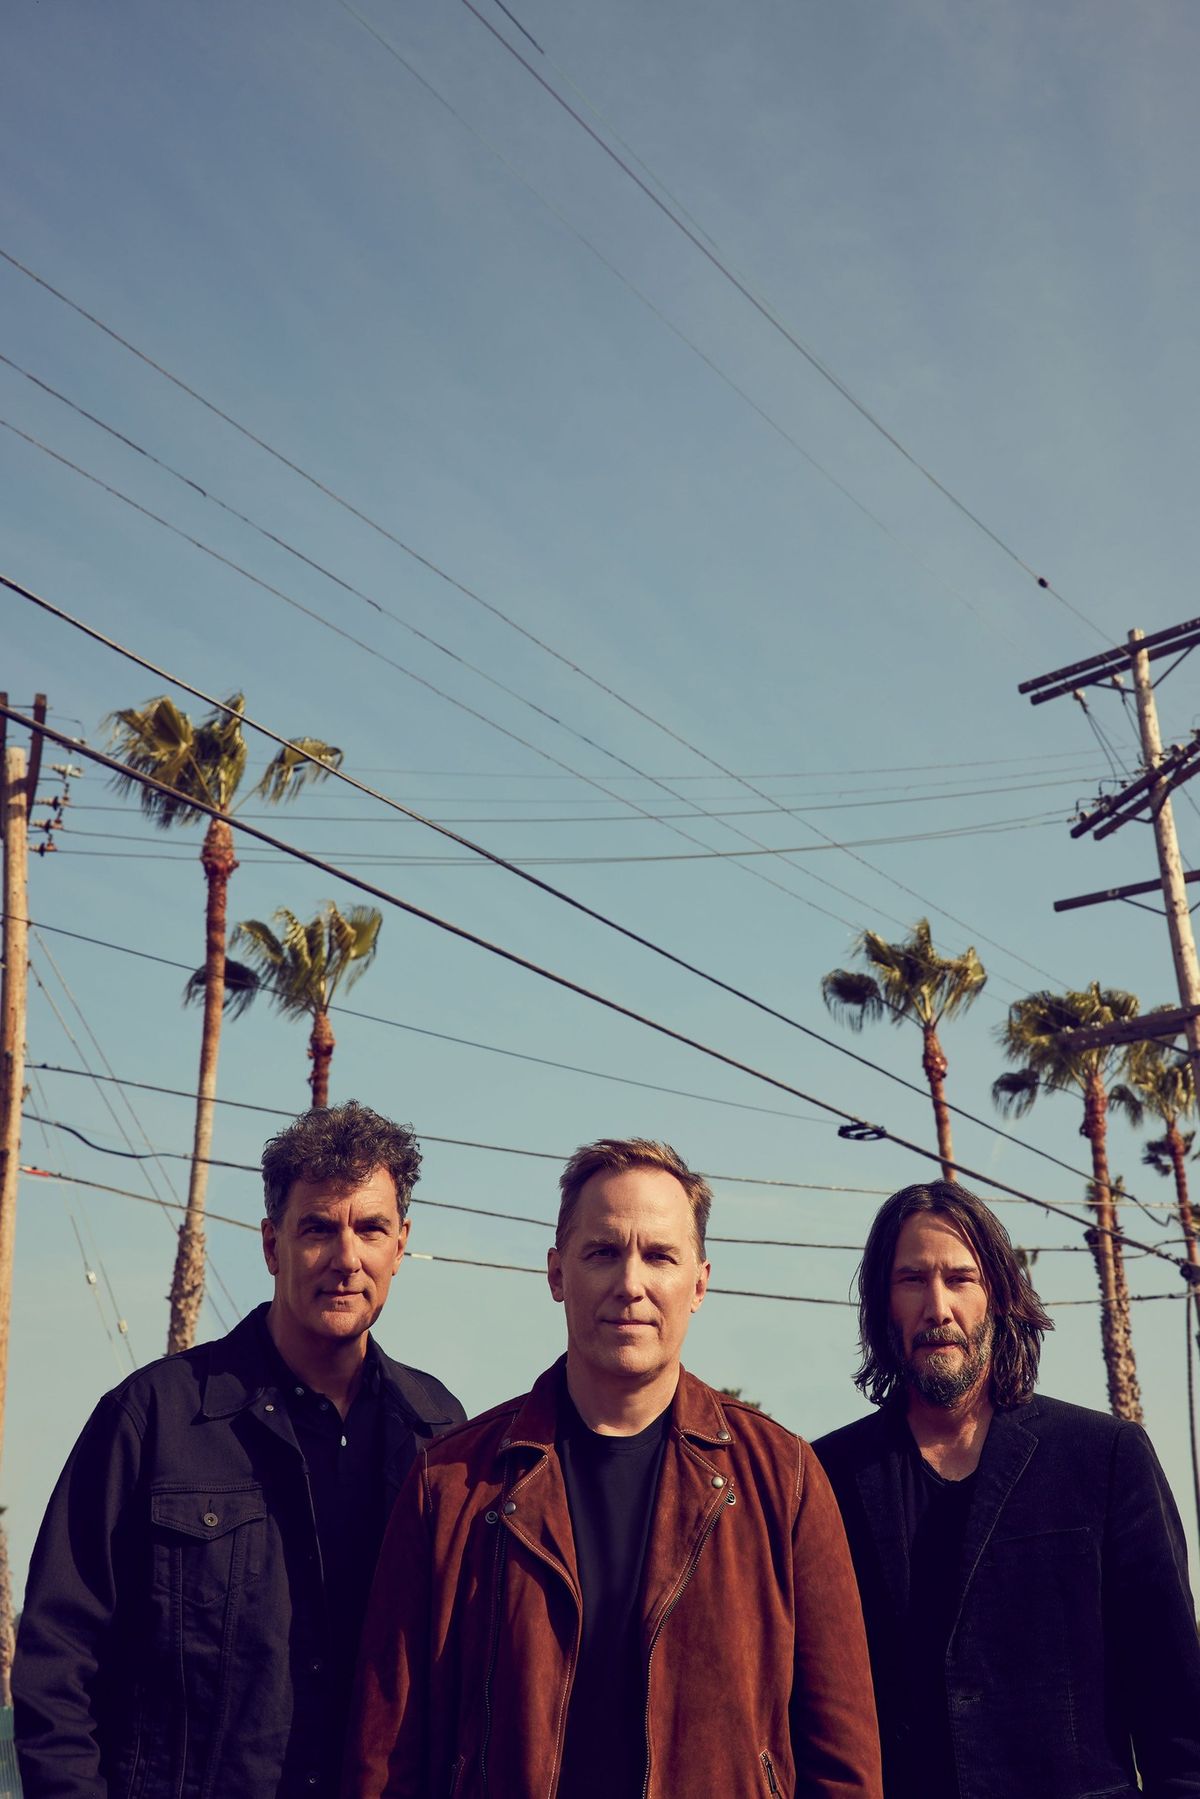 Dogstar - Somewhere Between the Power Lines and Palm Trees Tour